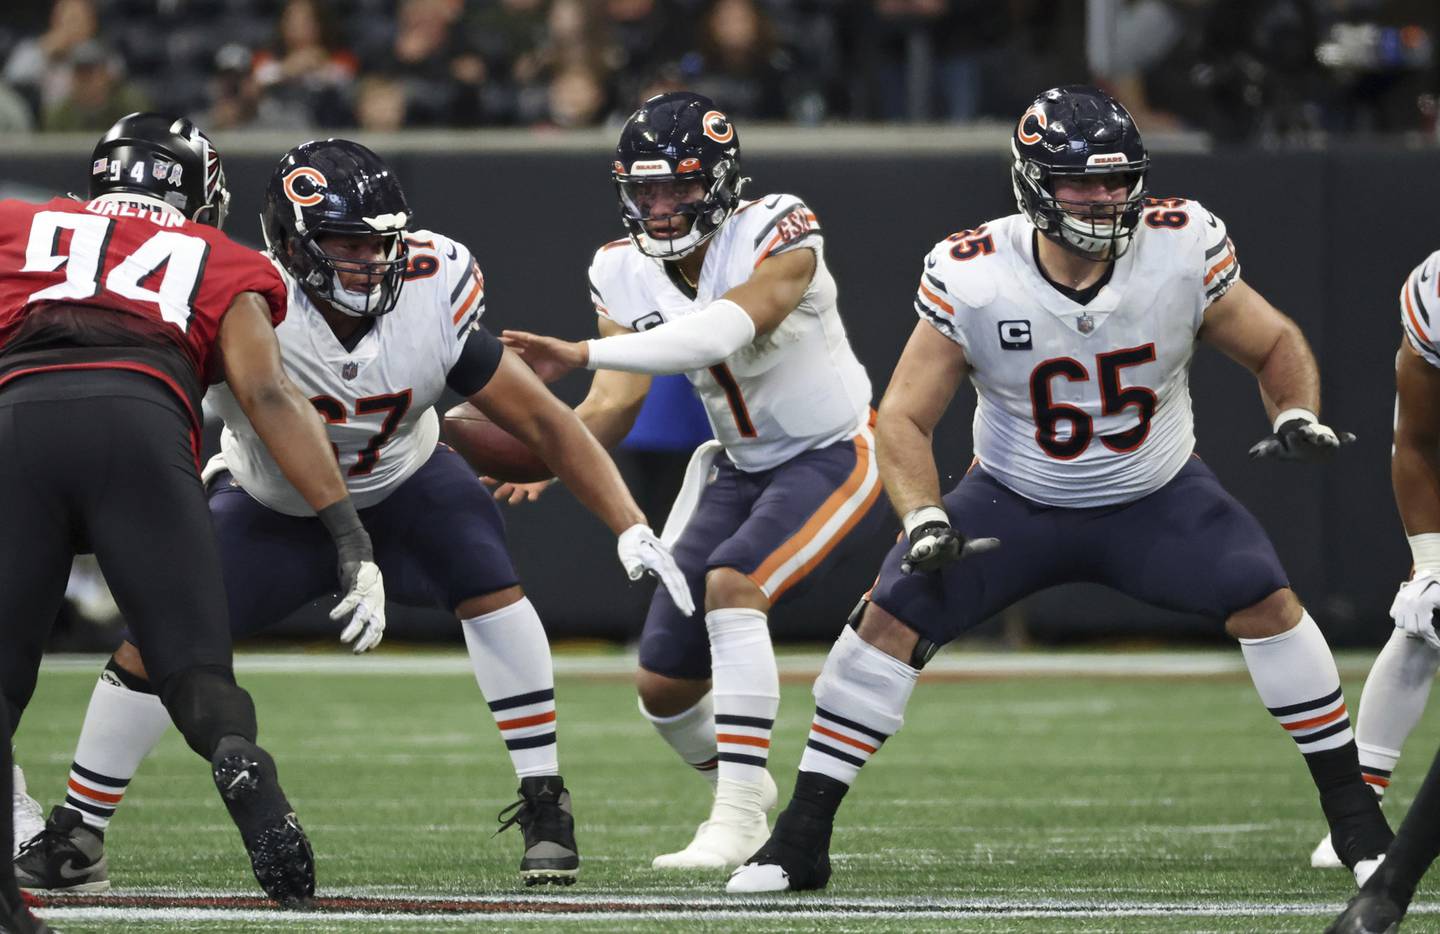 Bears offensive linemen Sam Mustipher (67) and Cody Whitehair (65) provide coverage for quarterback Justin Fields (1) in the second quarter against the Falcons at Mercedes-Benz Stadium on Nov. 20, 2022.